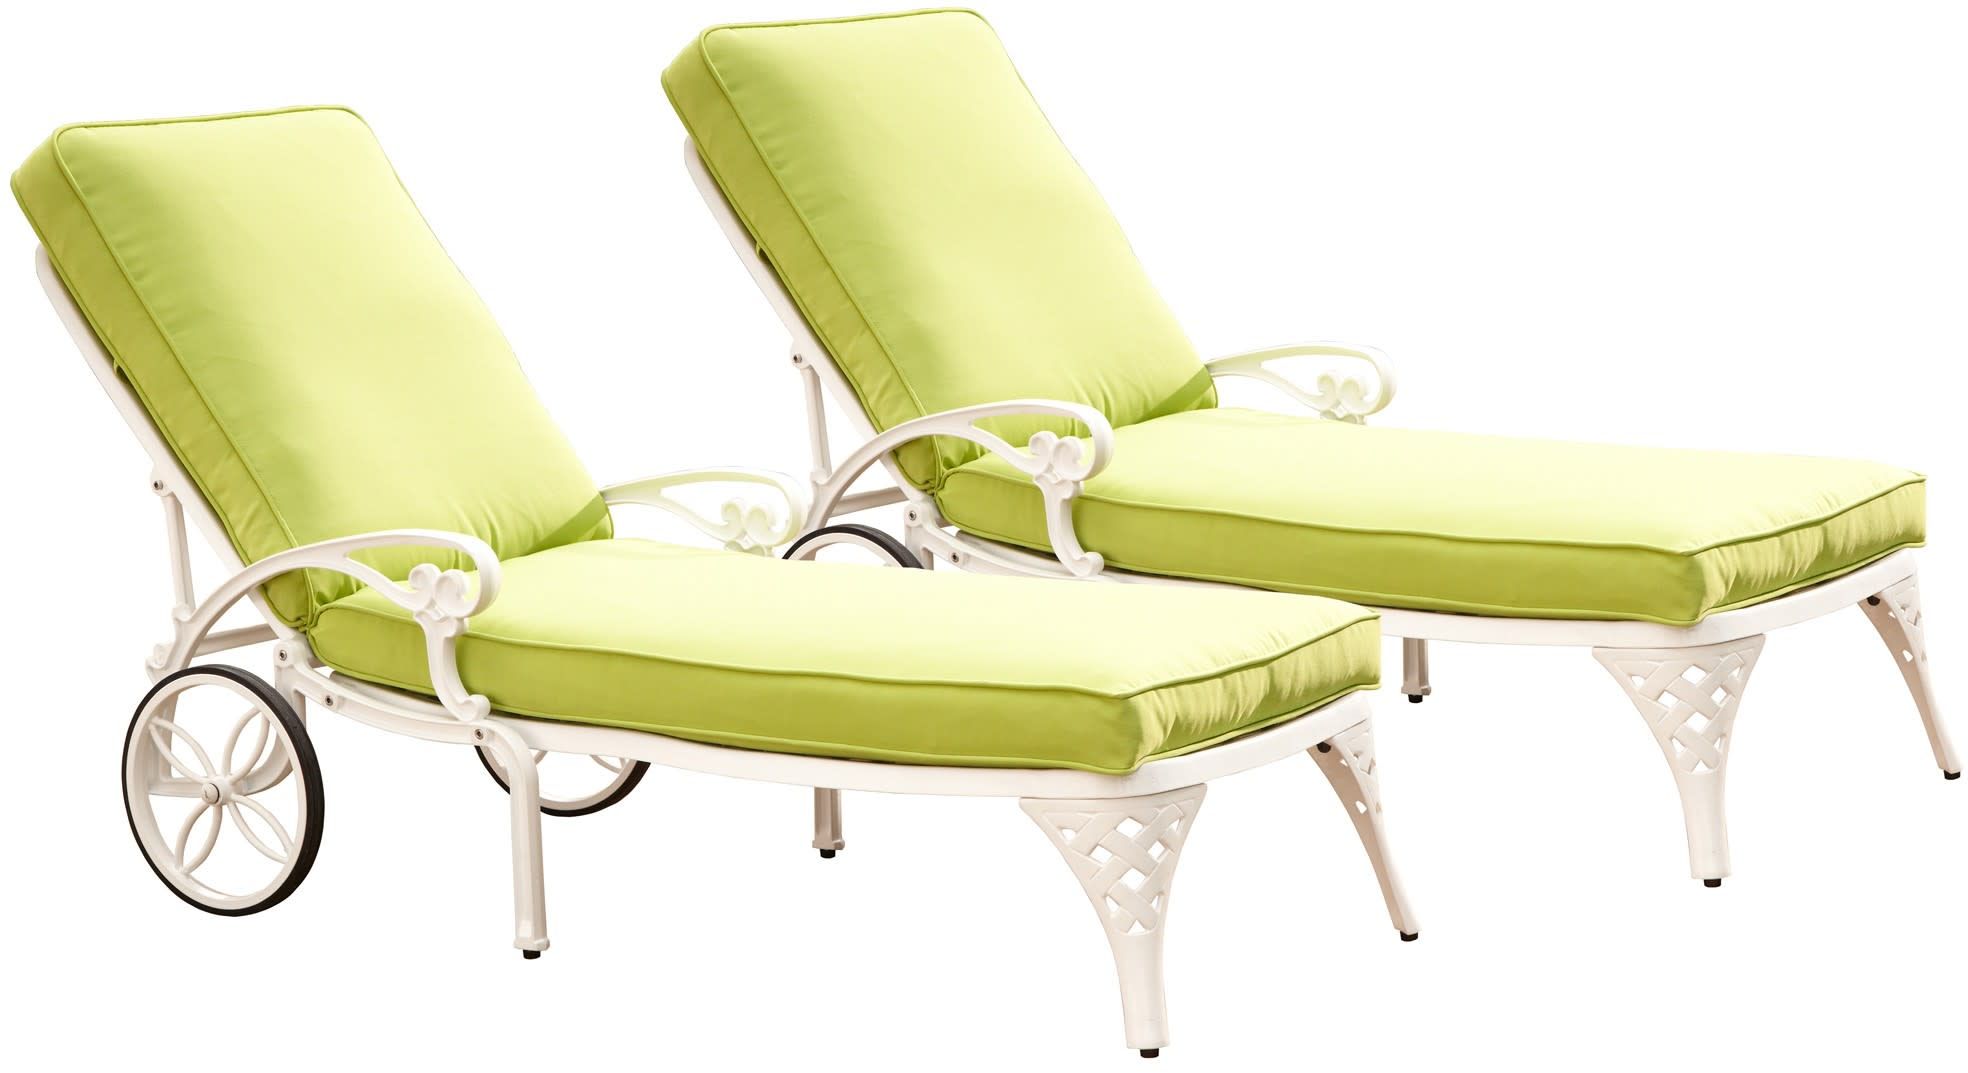 homestyles® Biscayne Set of 2 Off-White Chaise Lounge Chairs with Cushions